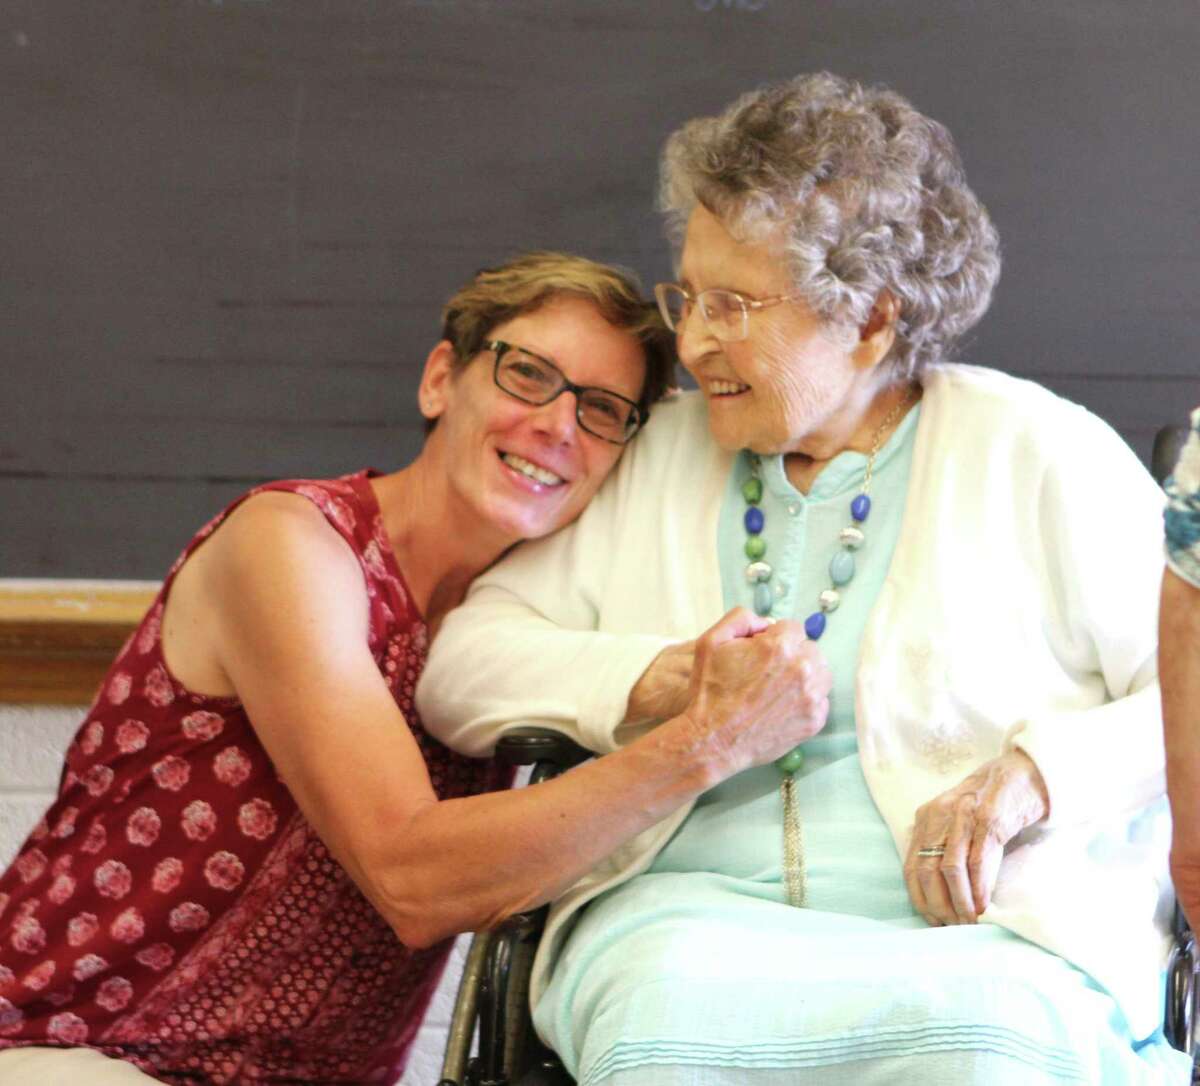 At 101 years young, Doris Drake (right) receives a memorable hug from one of her former students. Drake was once a teacher at Barryton Elementary School and attended the final walkthrough of the building on June 5. (Pioneer photo/Gena Harris)